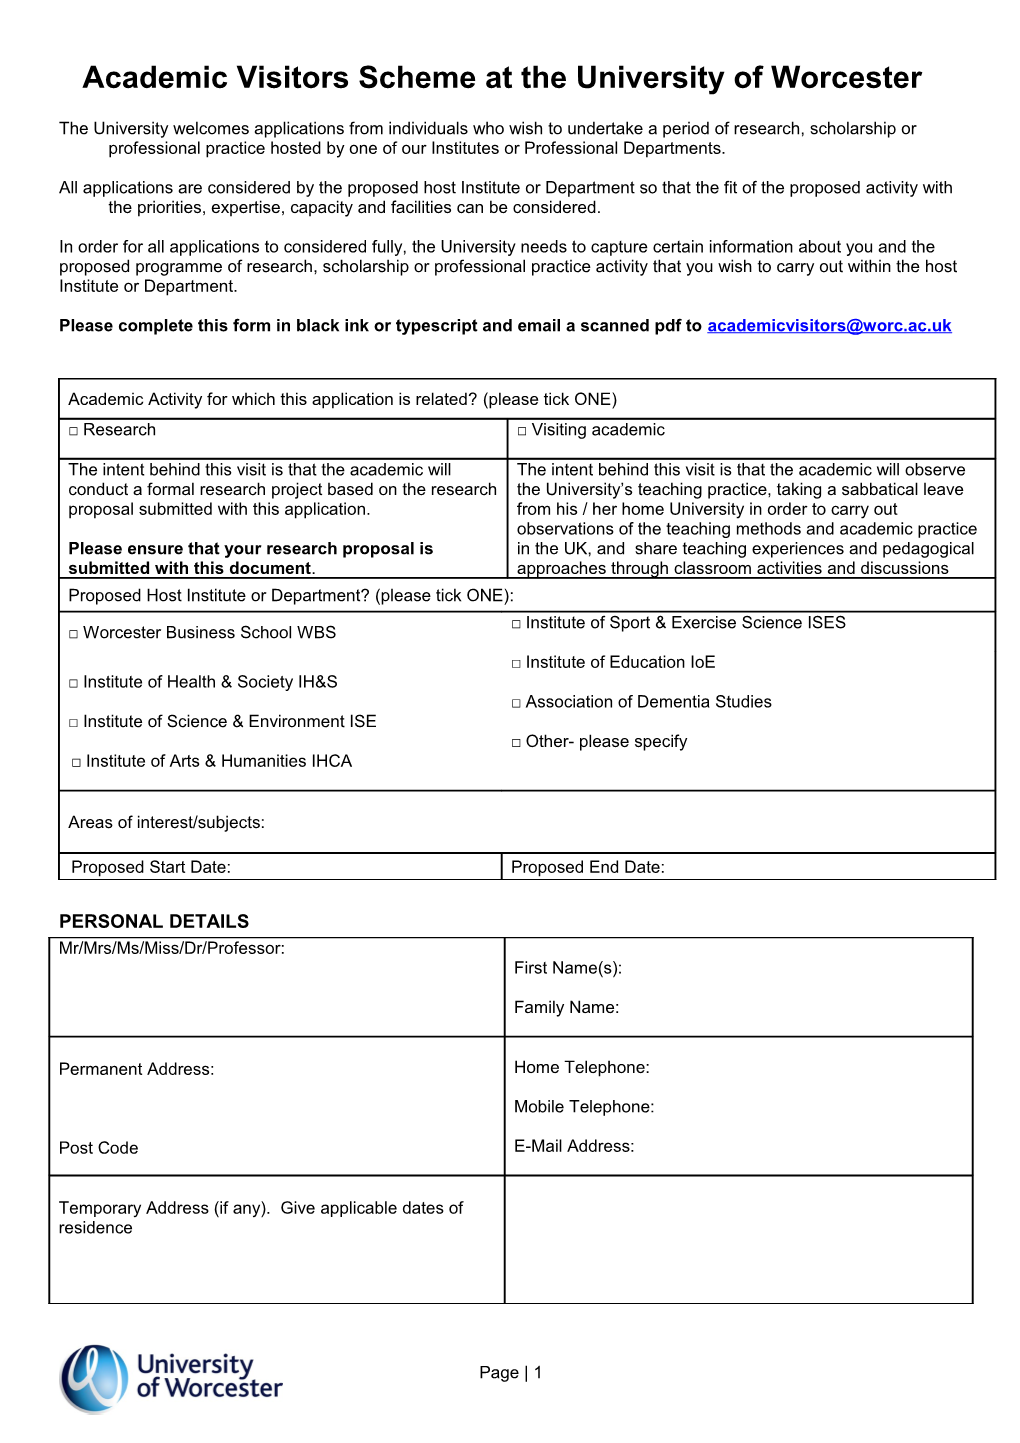 Application for Employment s6